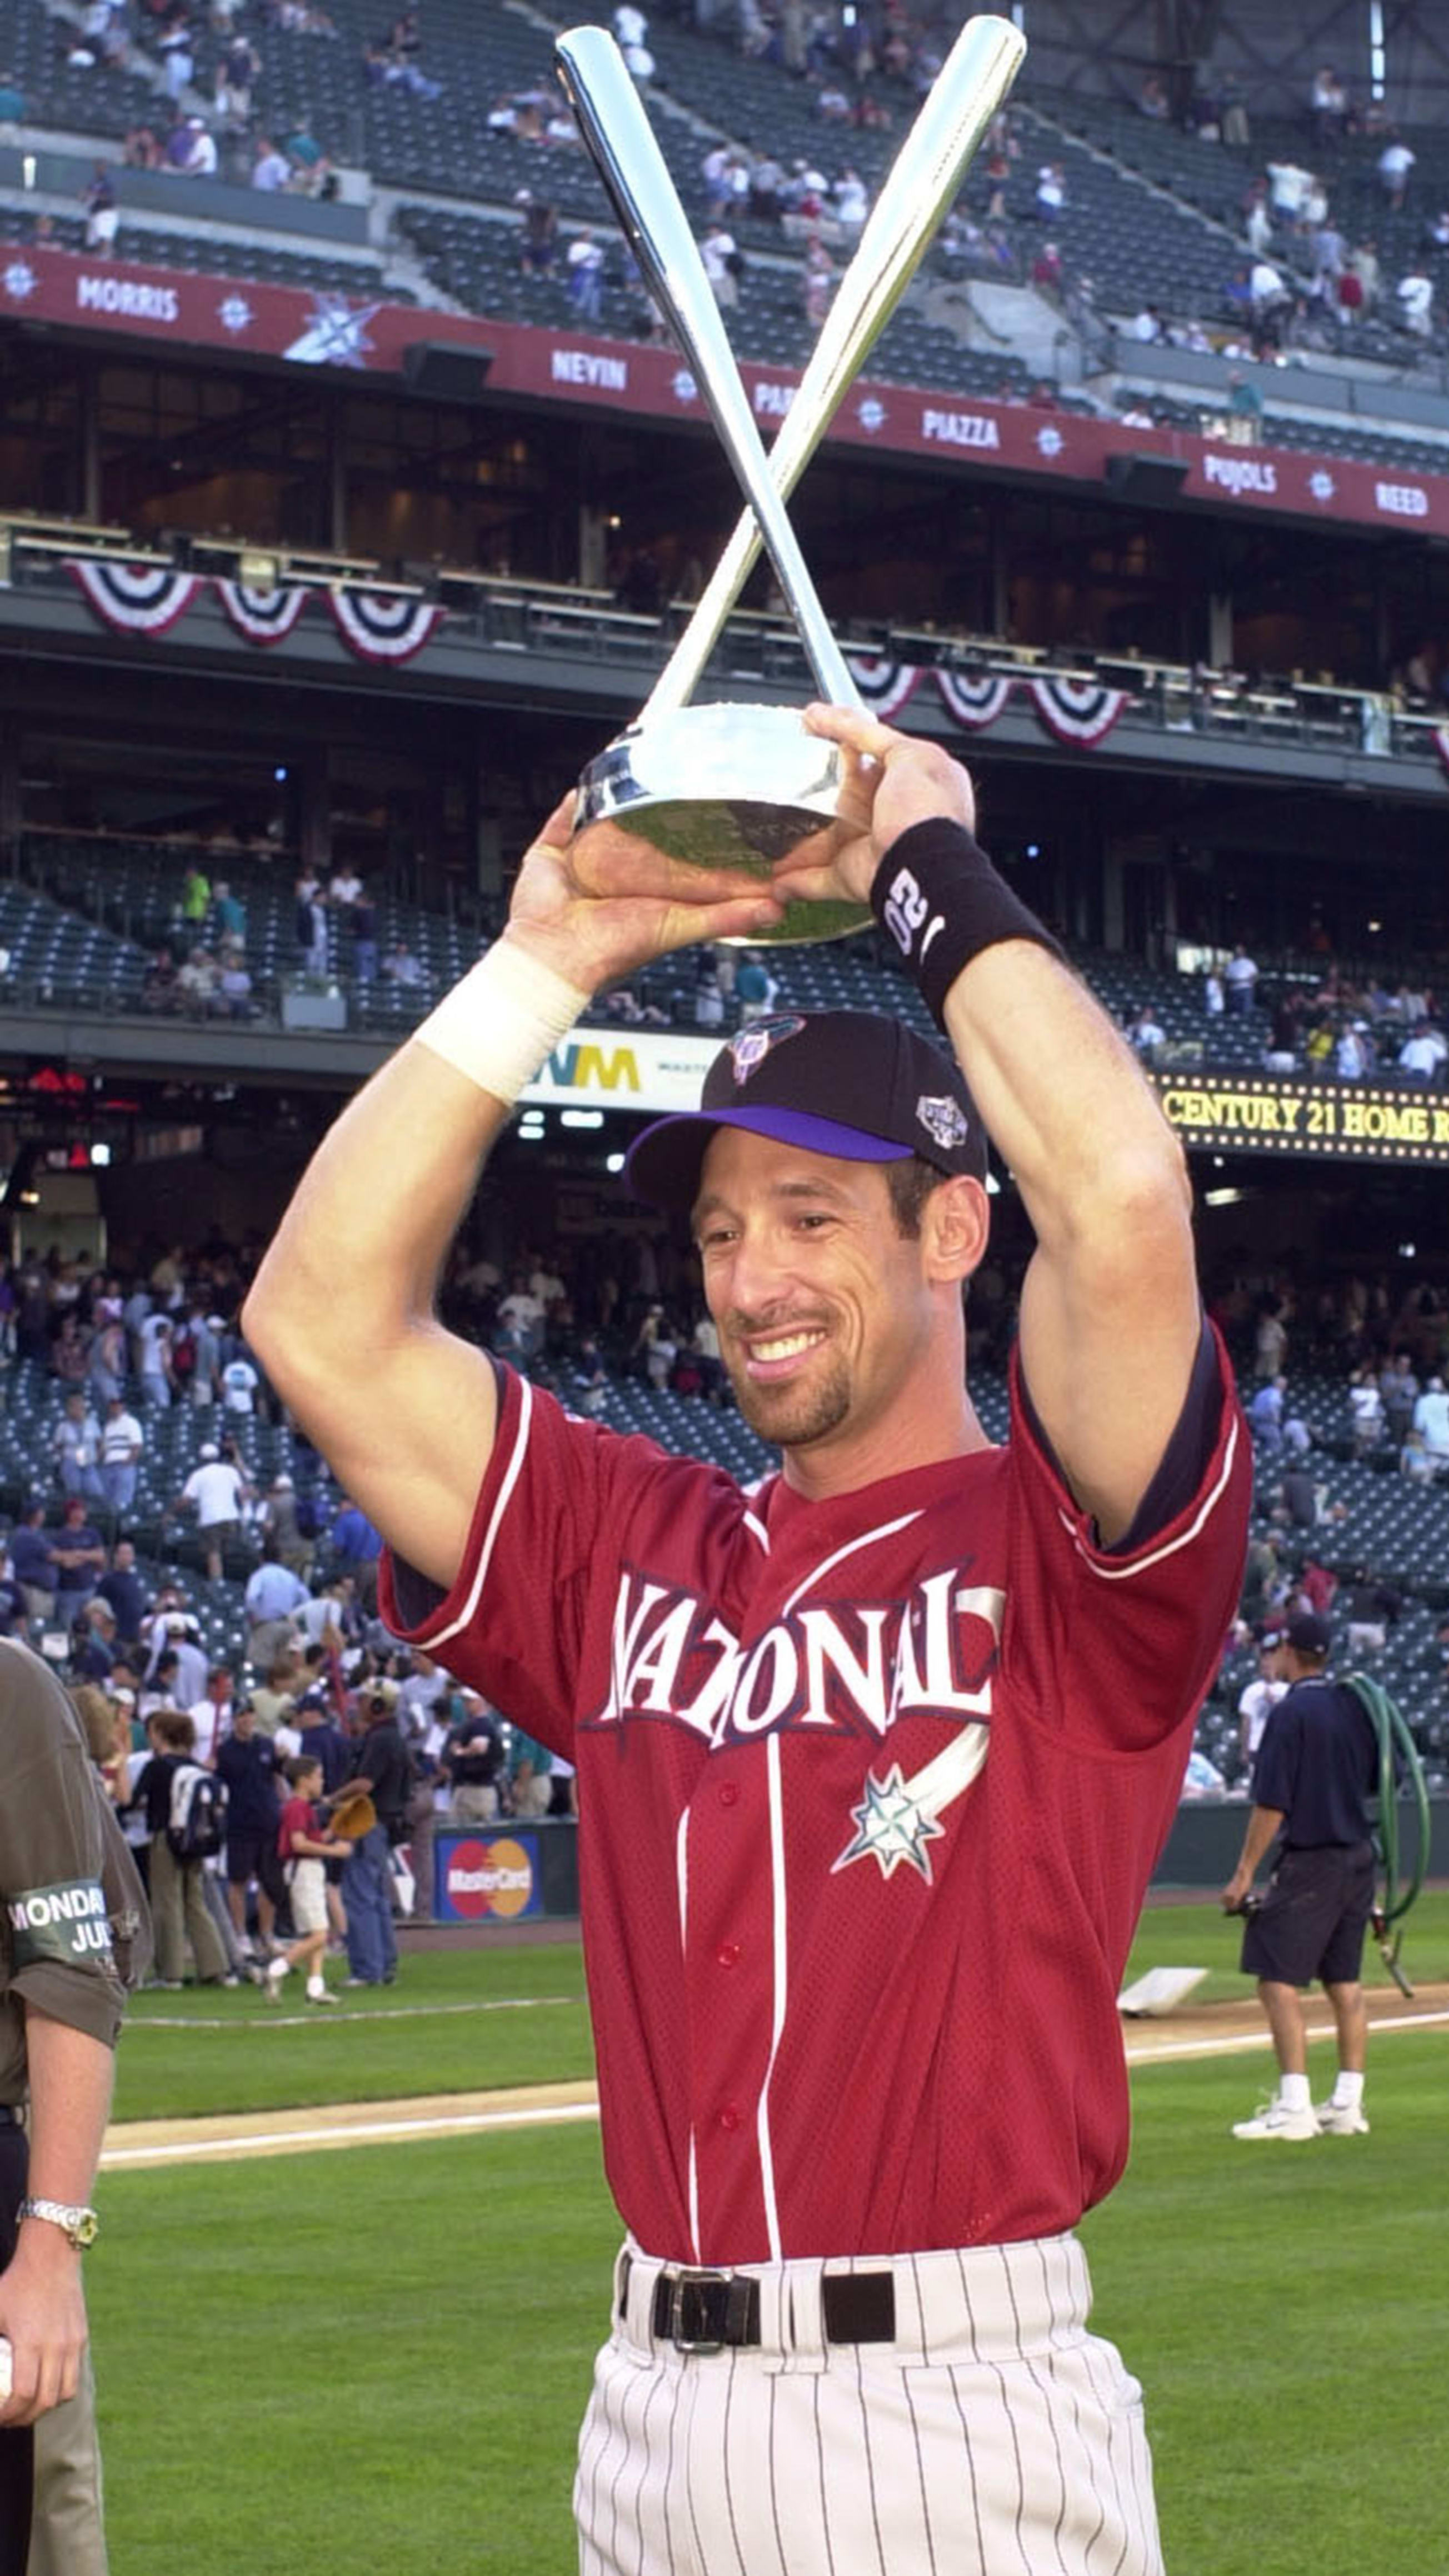 This Tuesday, 2001 World Series Hero Luis Gonzalez will be at